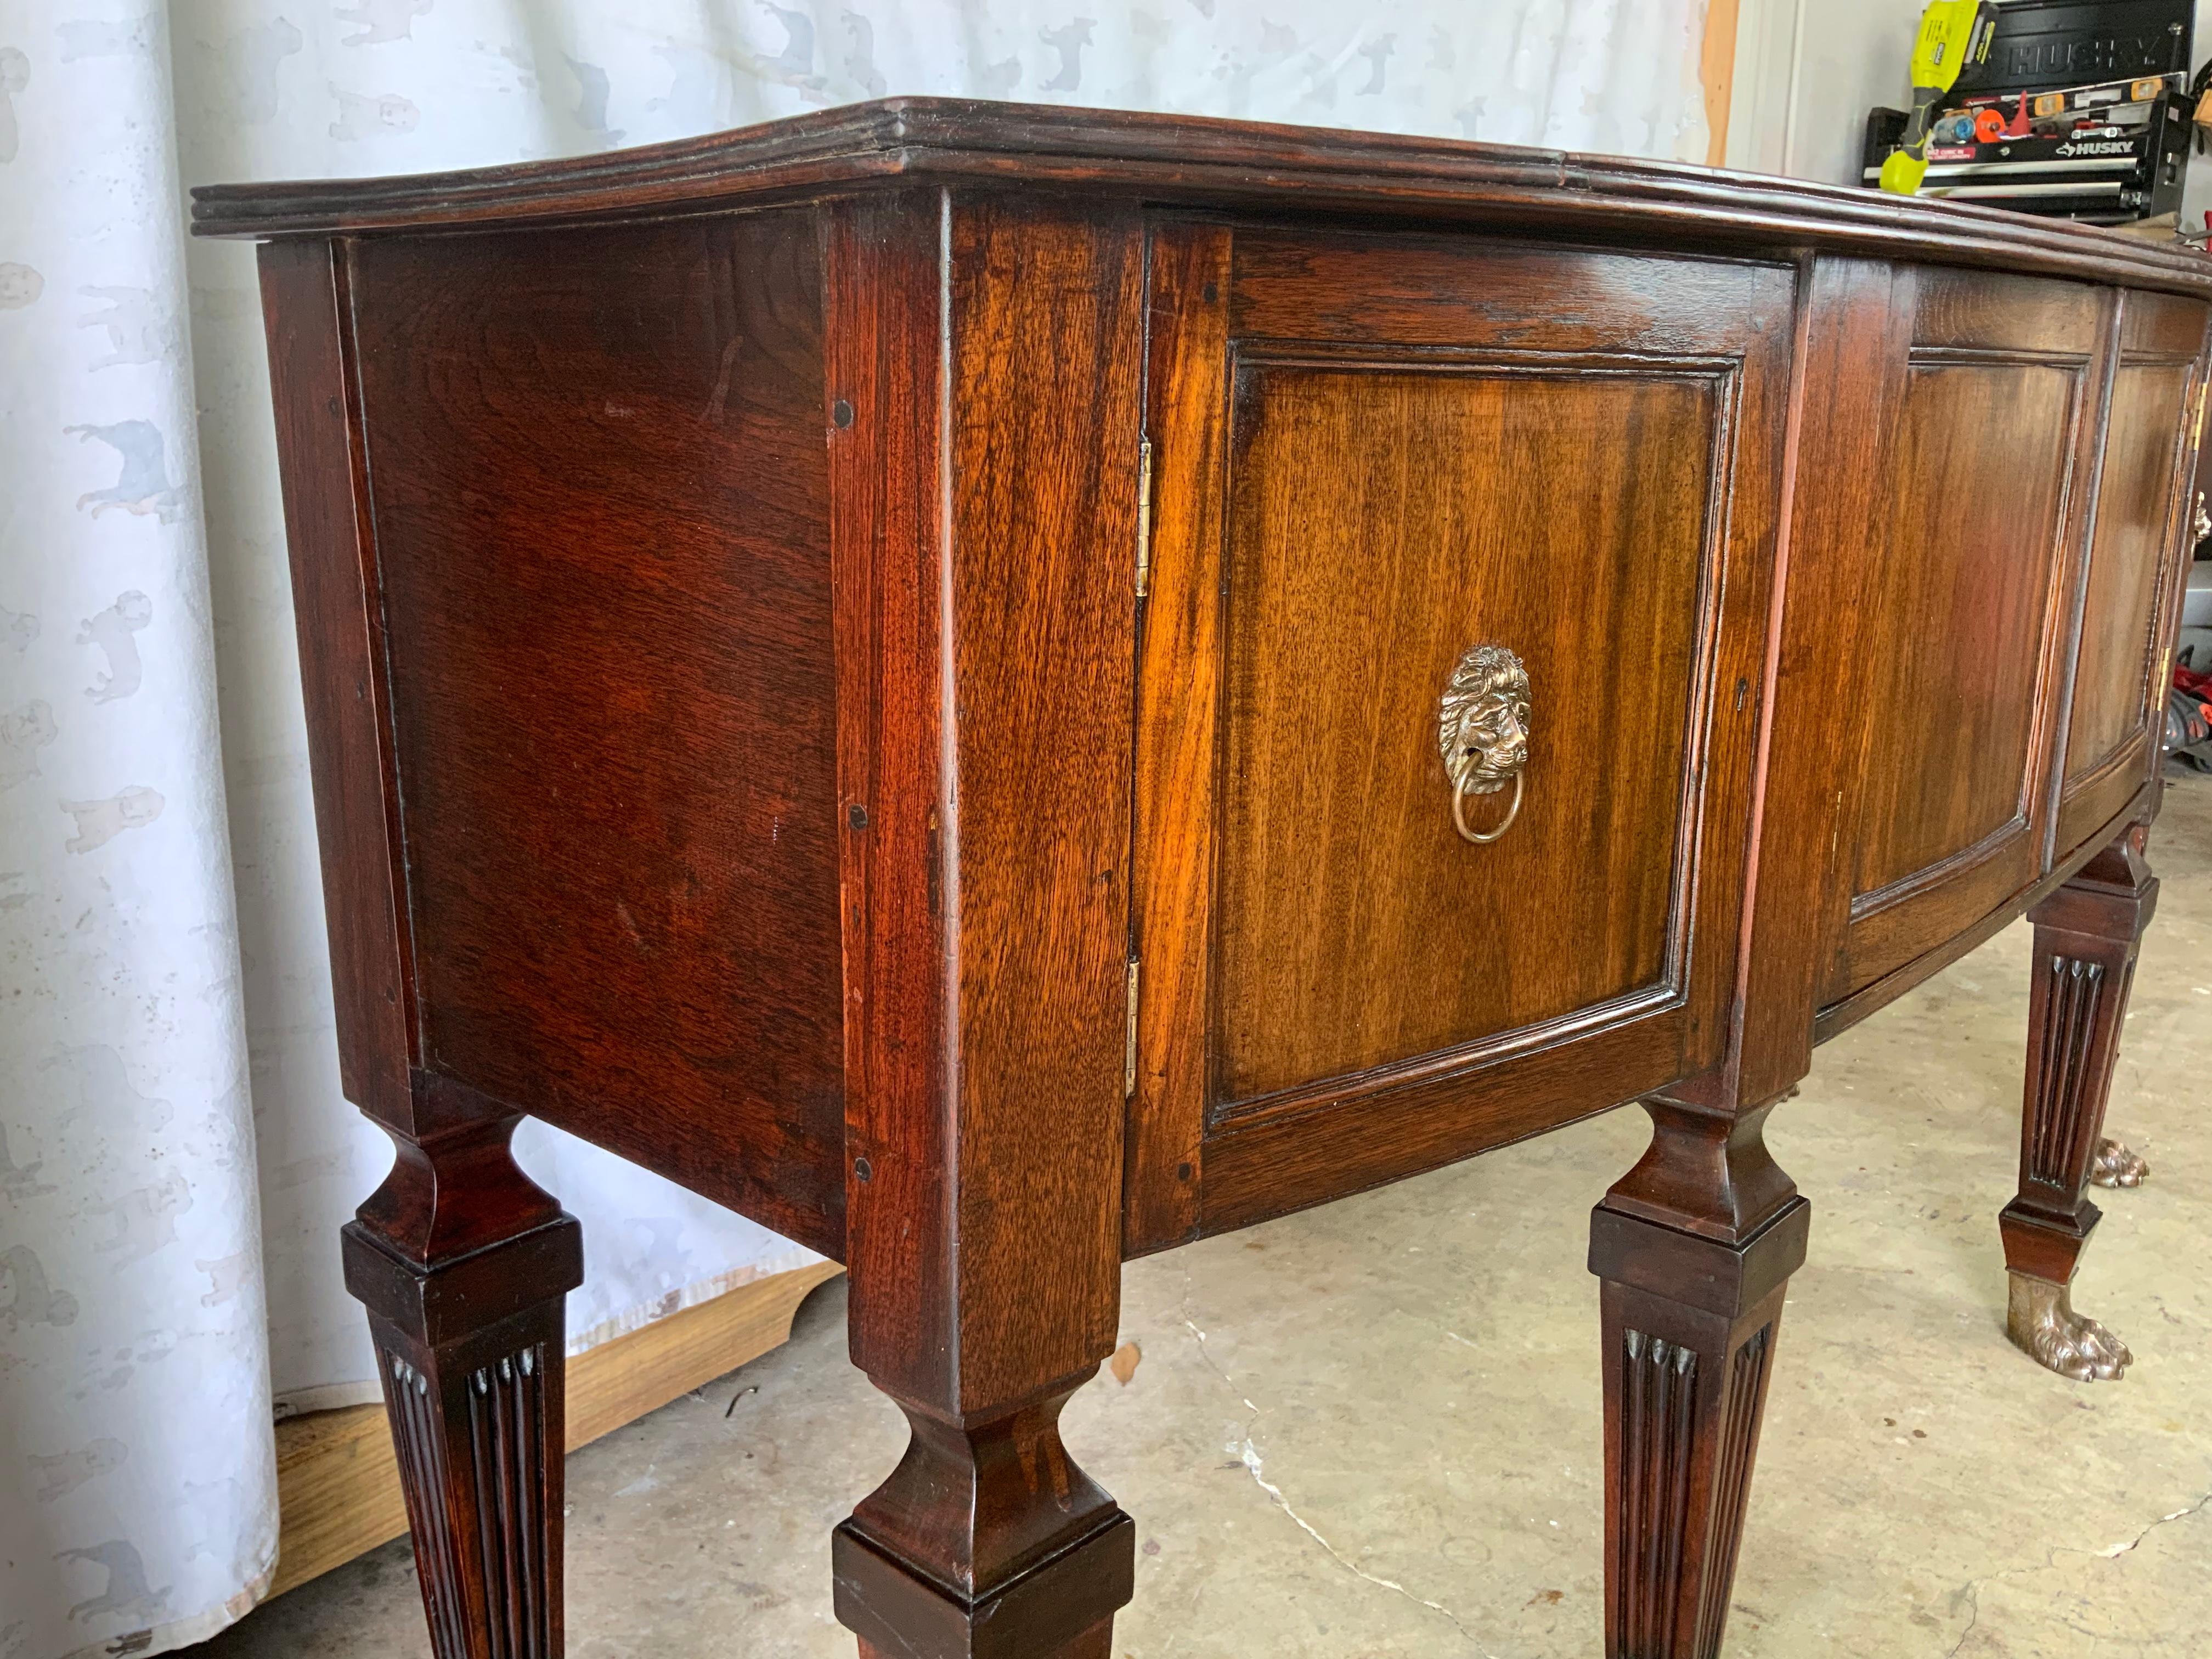 British Colonial Mahogany and Teak sideboard with very nicely carved fluted tapered legs and brass hairy paw feet. 
Attributed to the British West Indies colonies sometime around the mid to late 1800’s, these colonial pieces were commonly made in